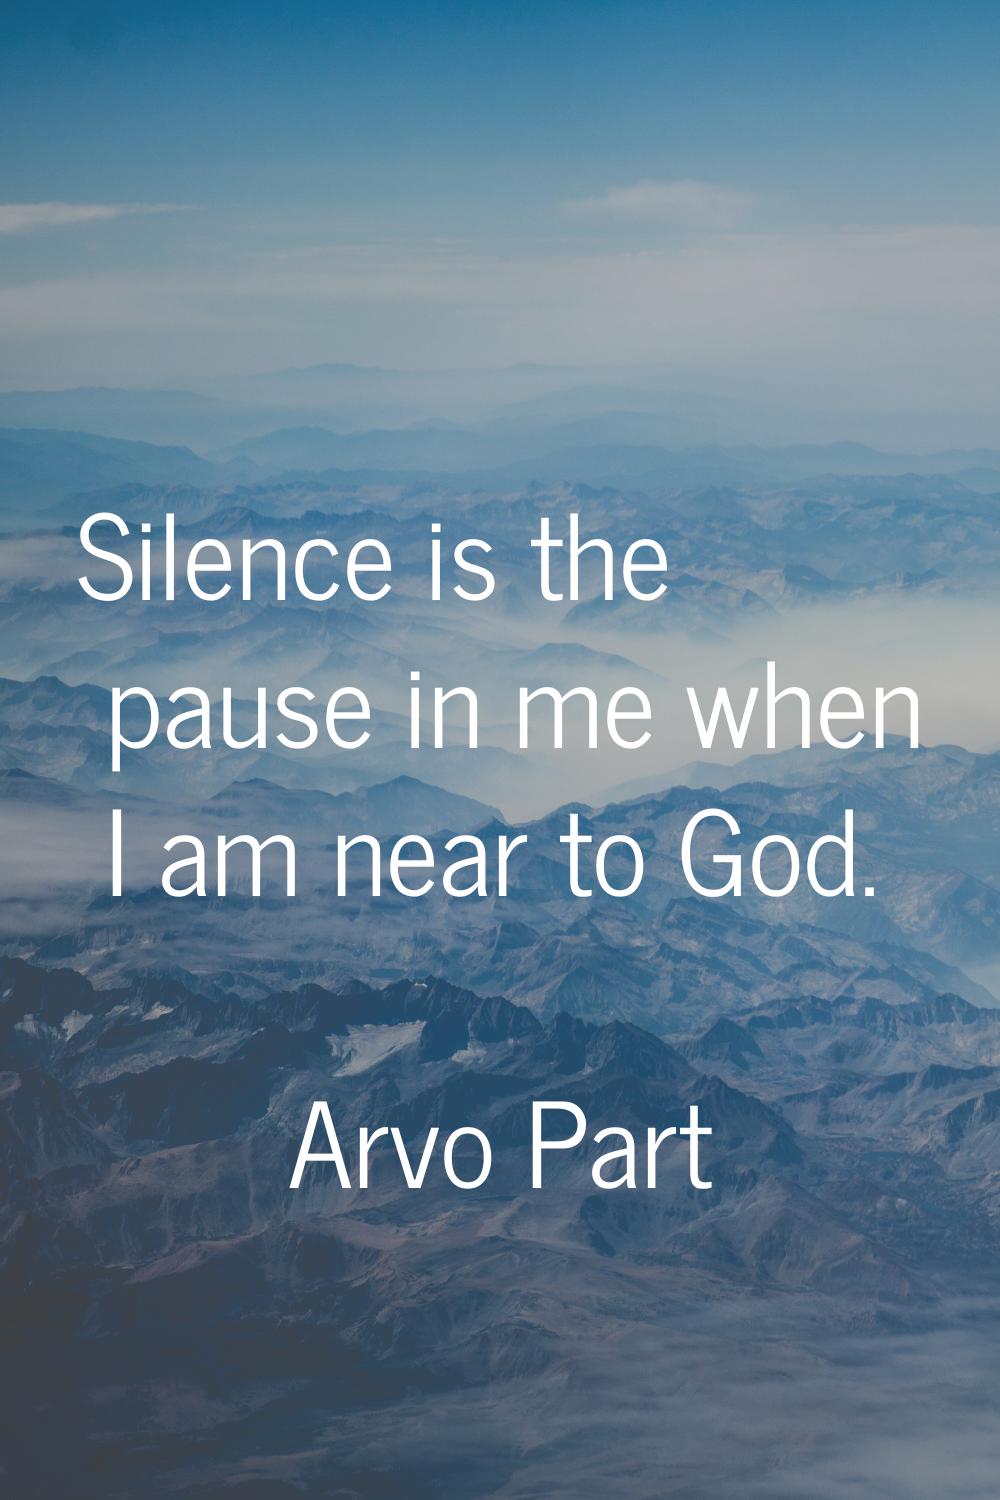 Silence is the pause in me when I am near to God.